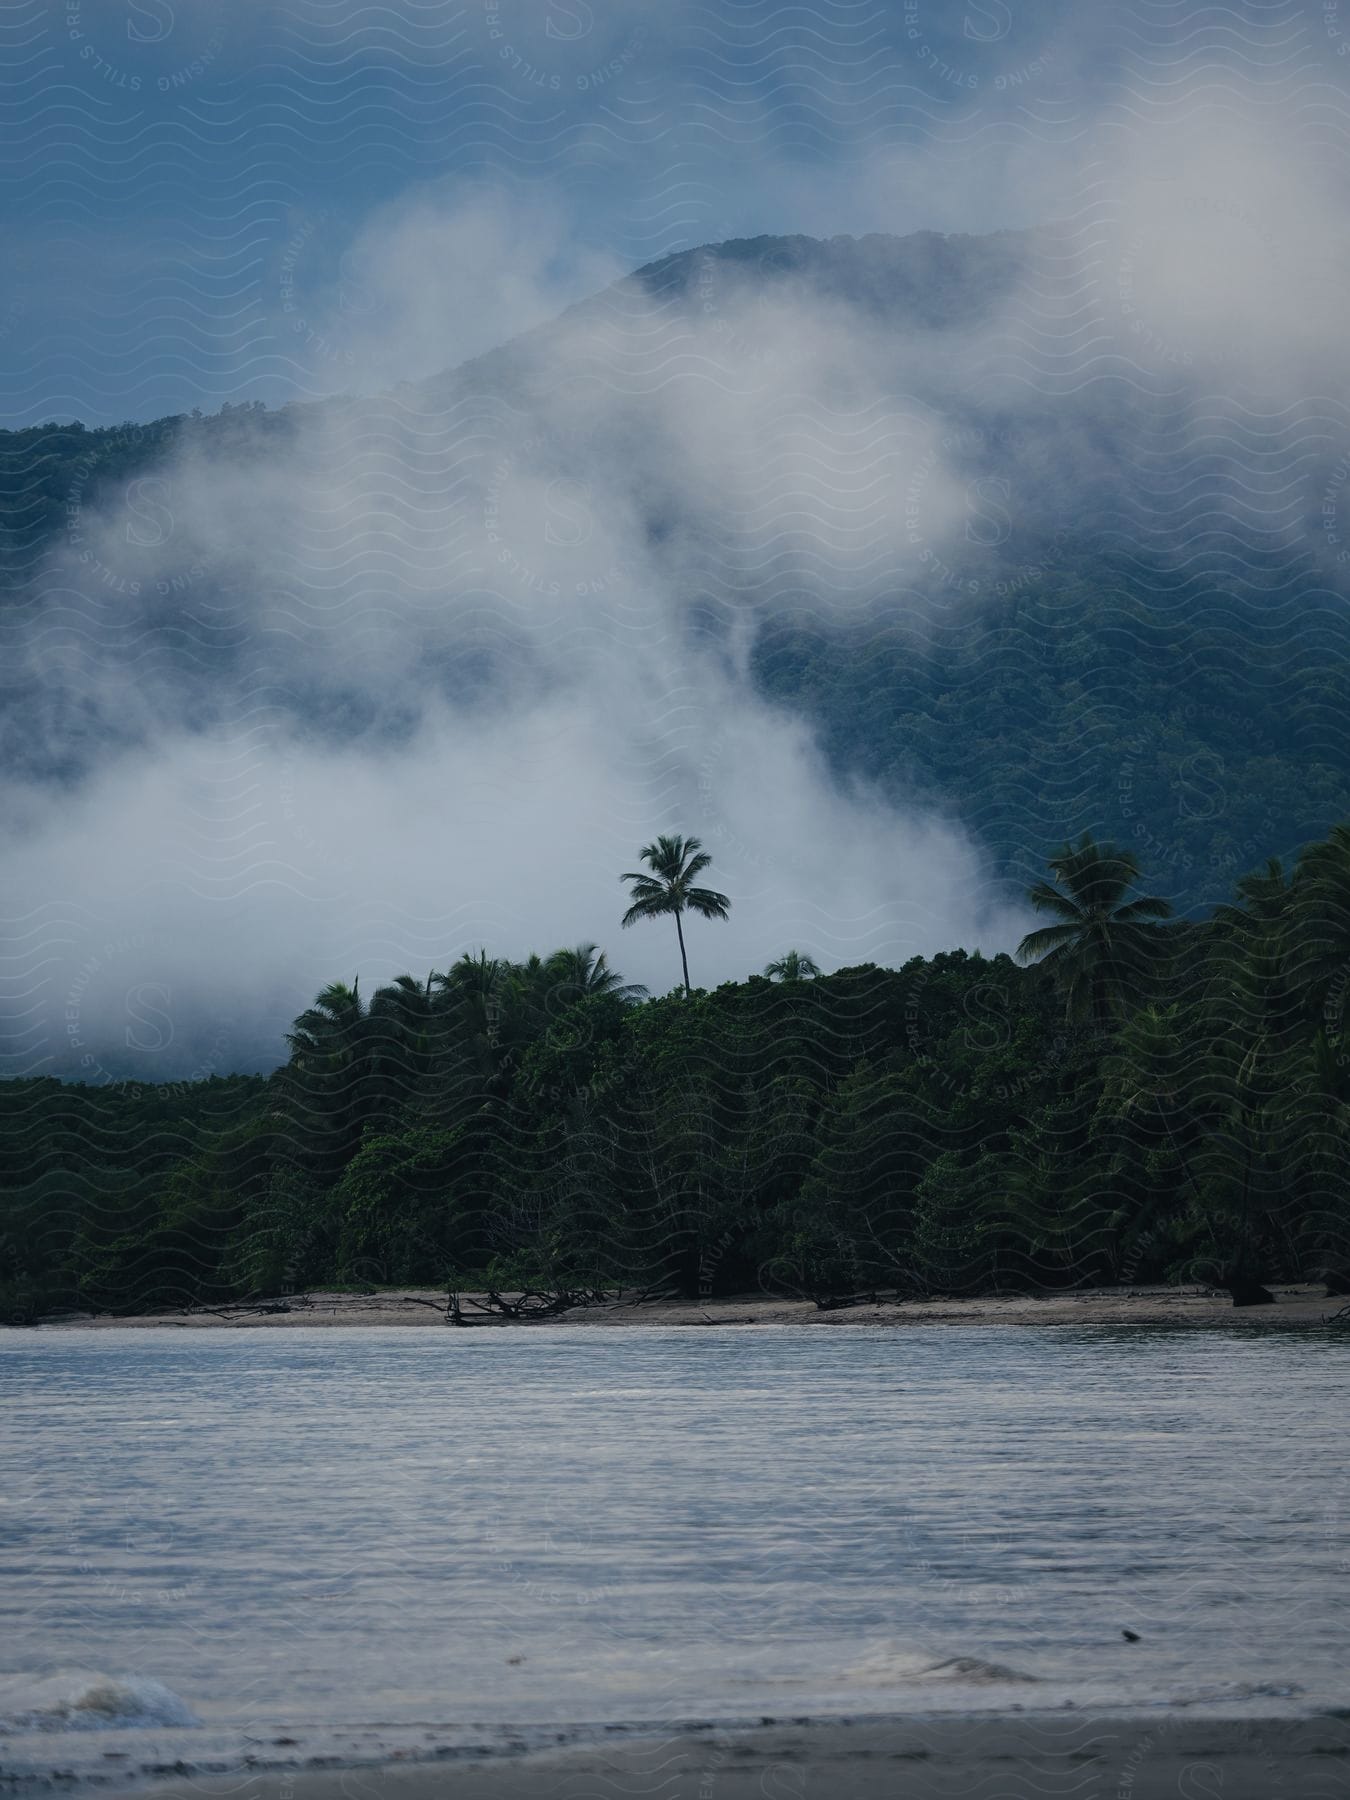 Landscape of a beach with tropical vegetation and mountains around.